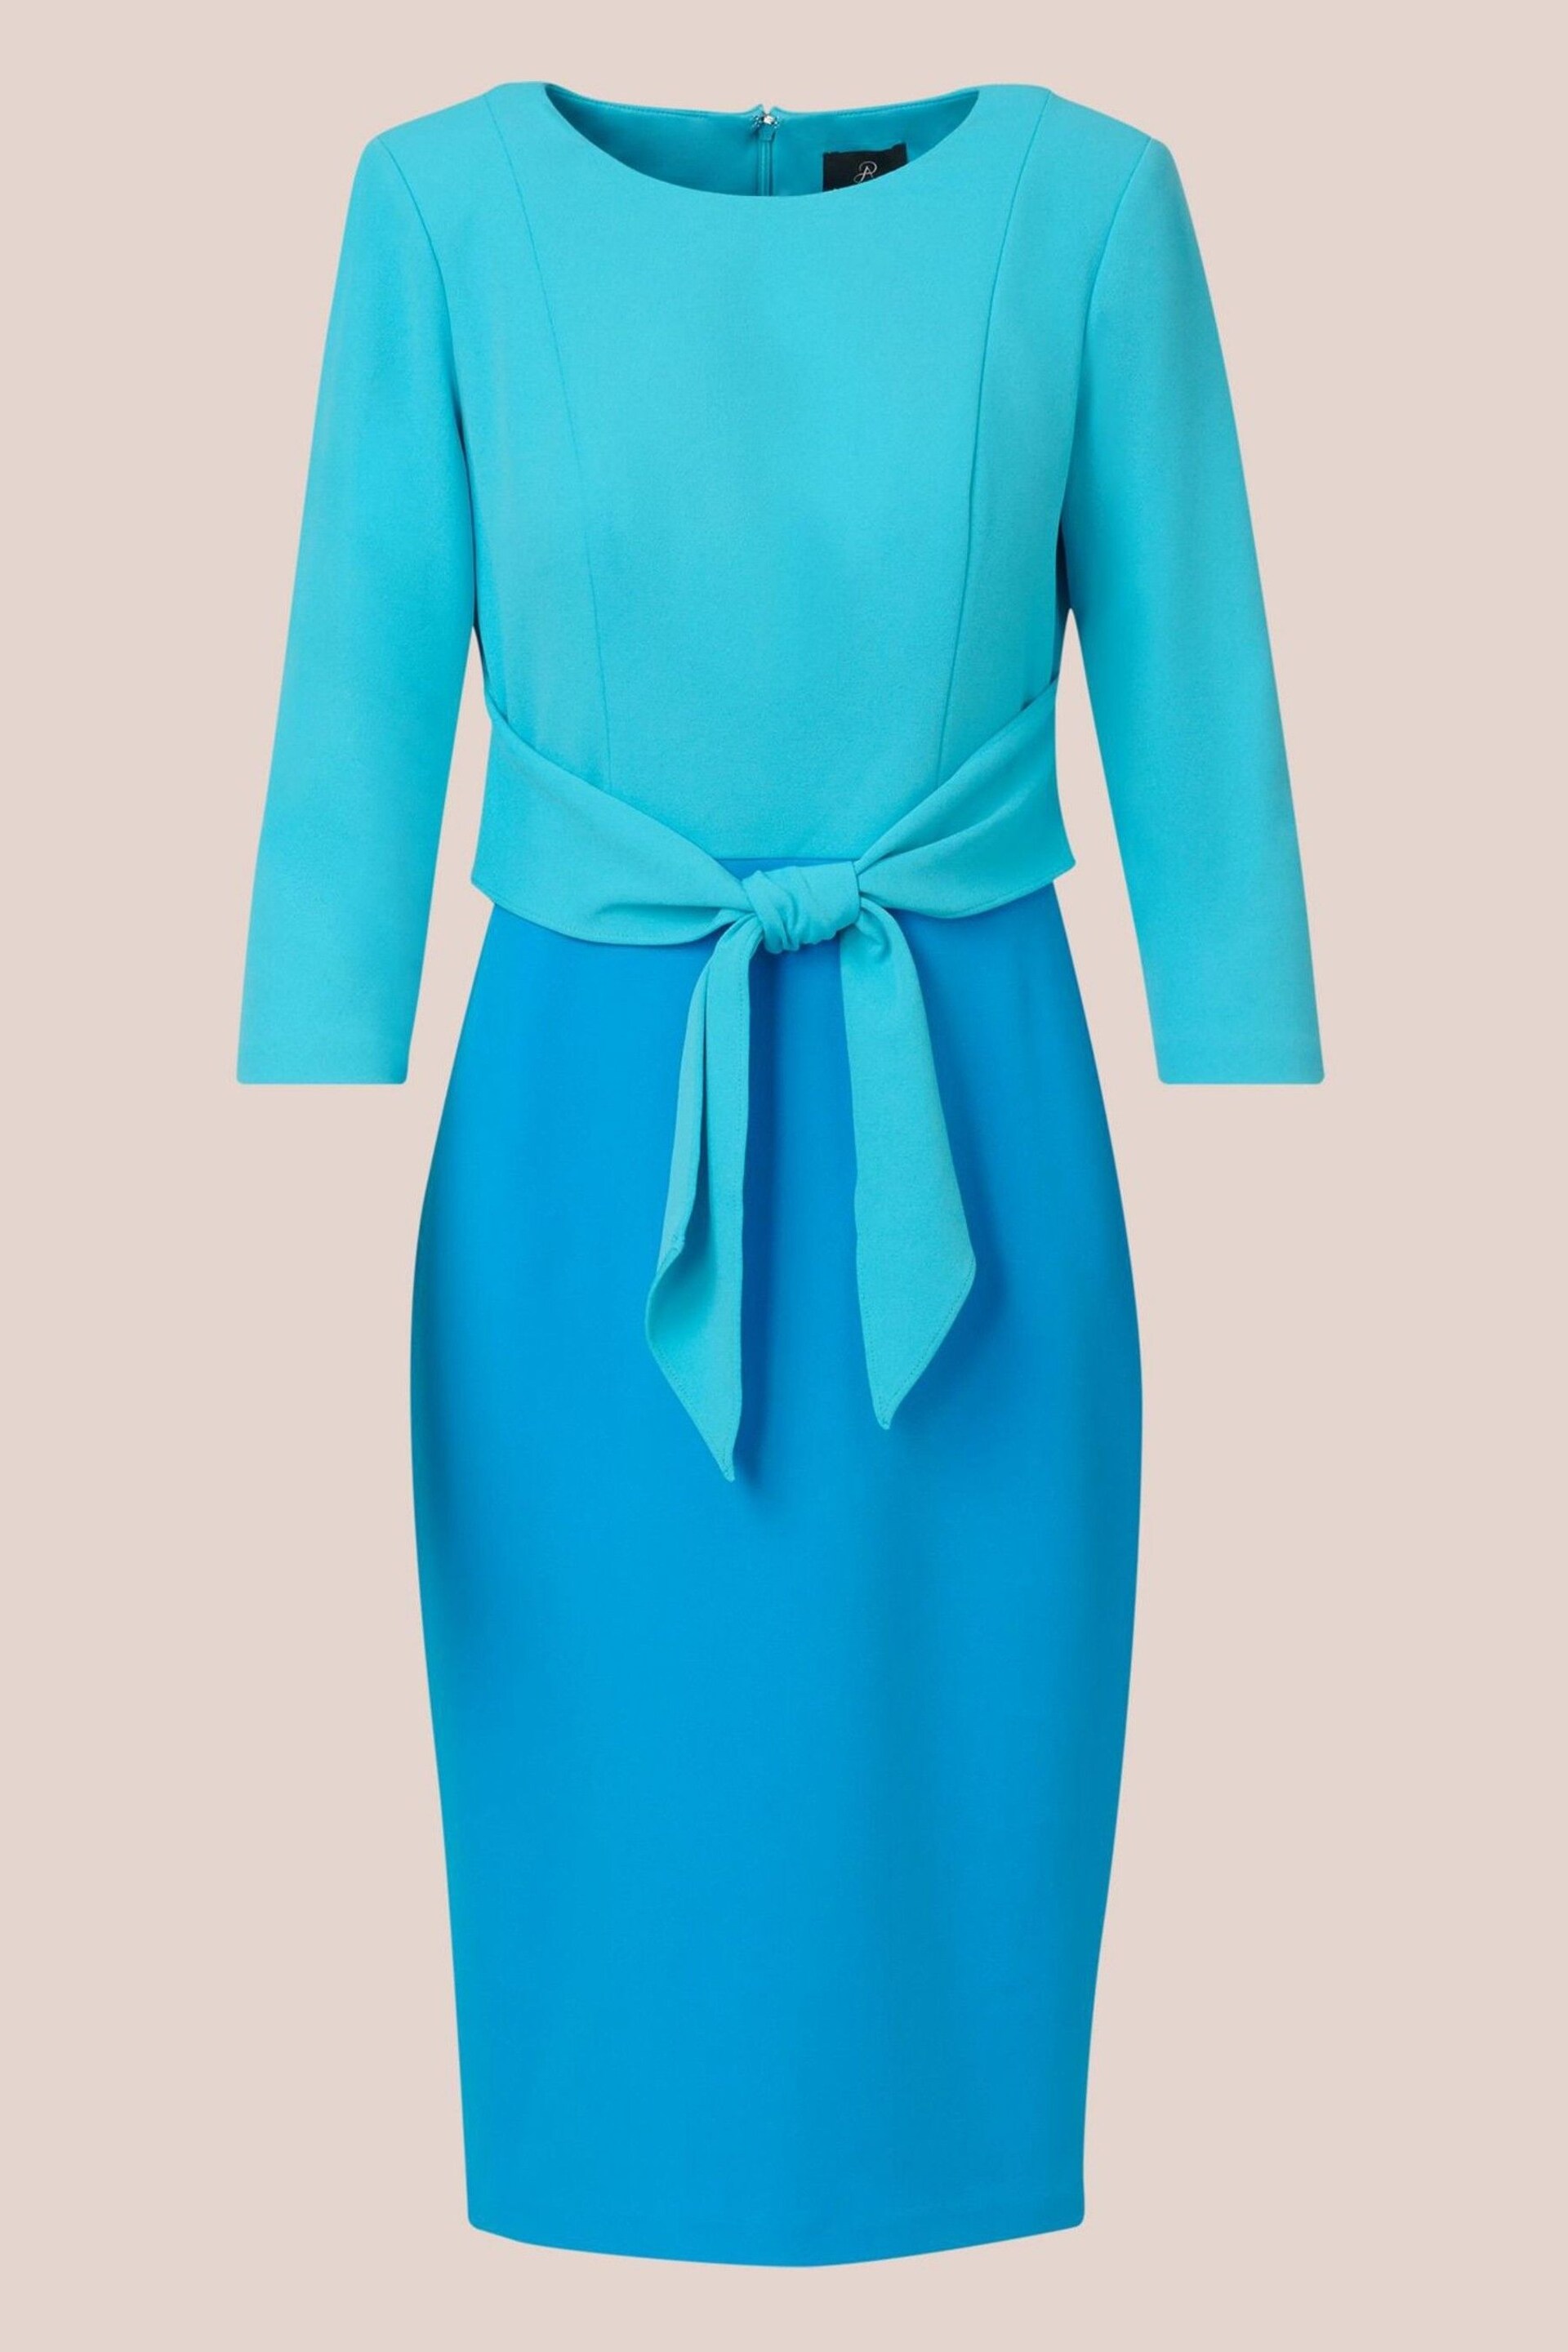 Adrianna Papell Blue Colorblock Tie Front Dress - Image 6 of 7